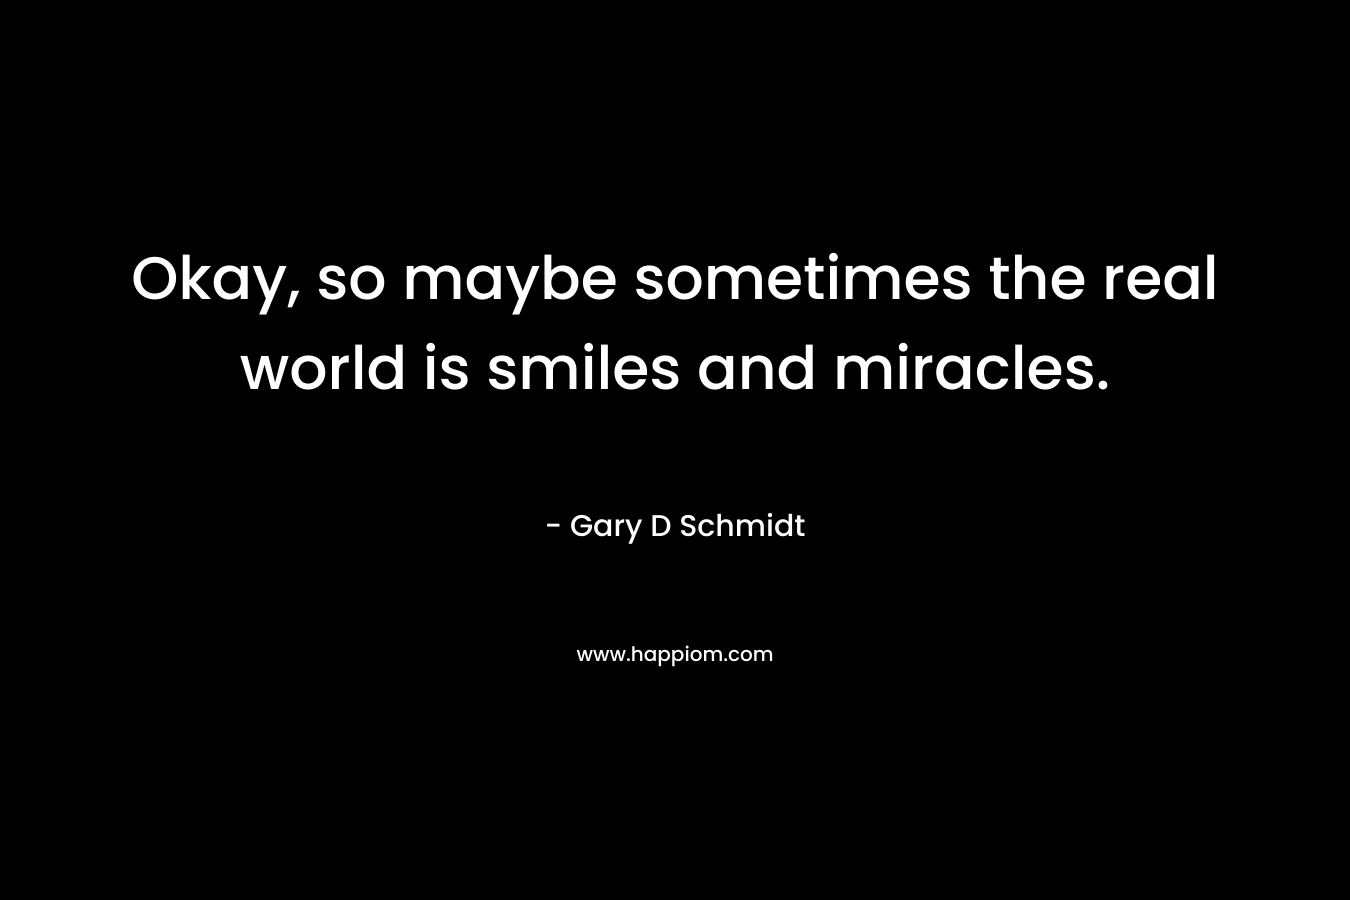 Okay, so maybe sometimes the real world is smiles and miracles.